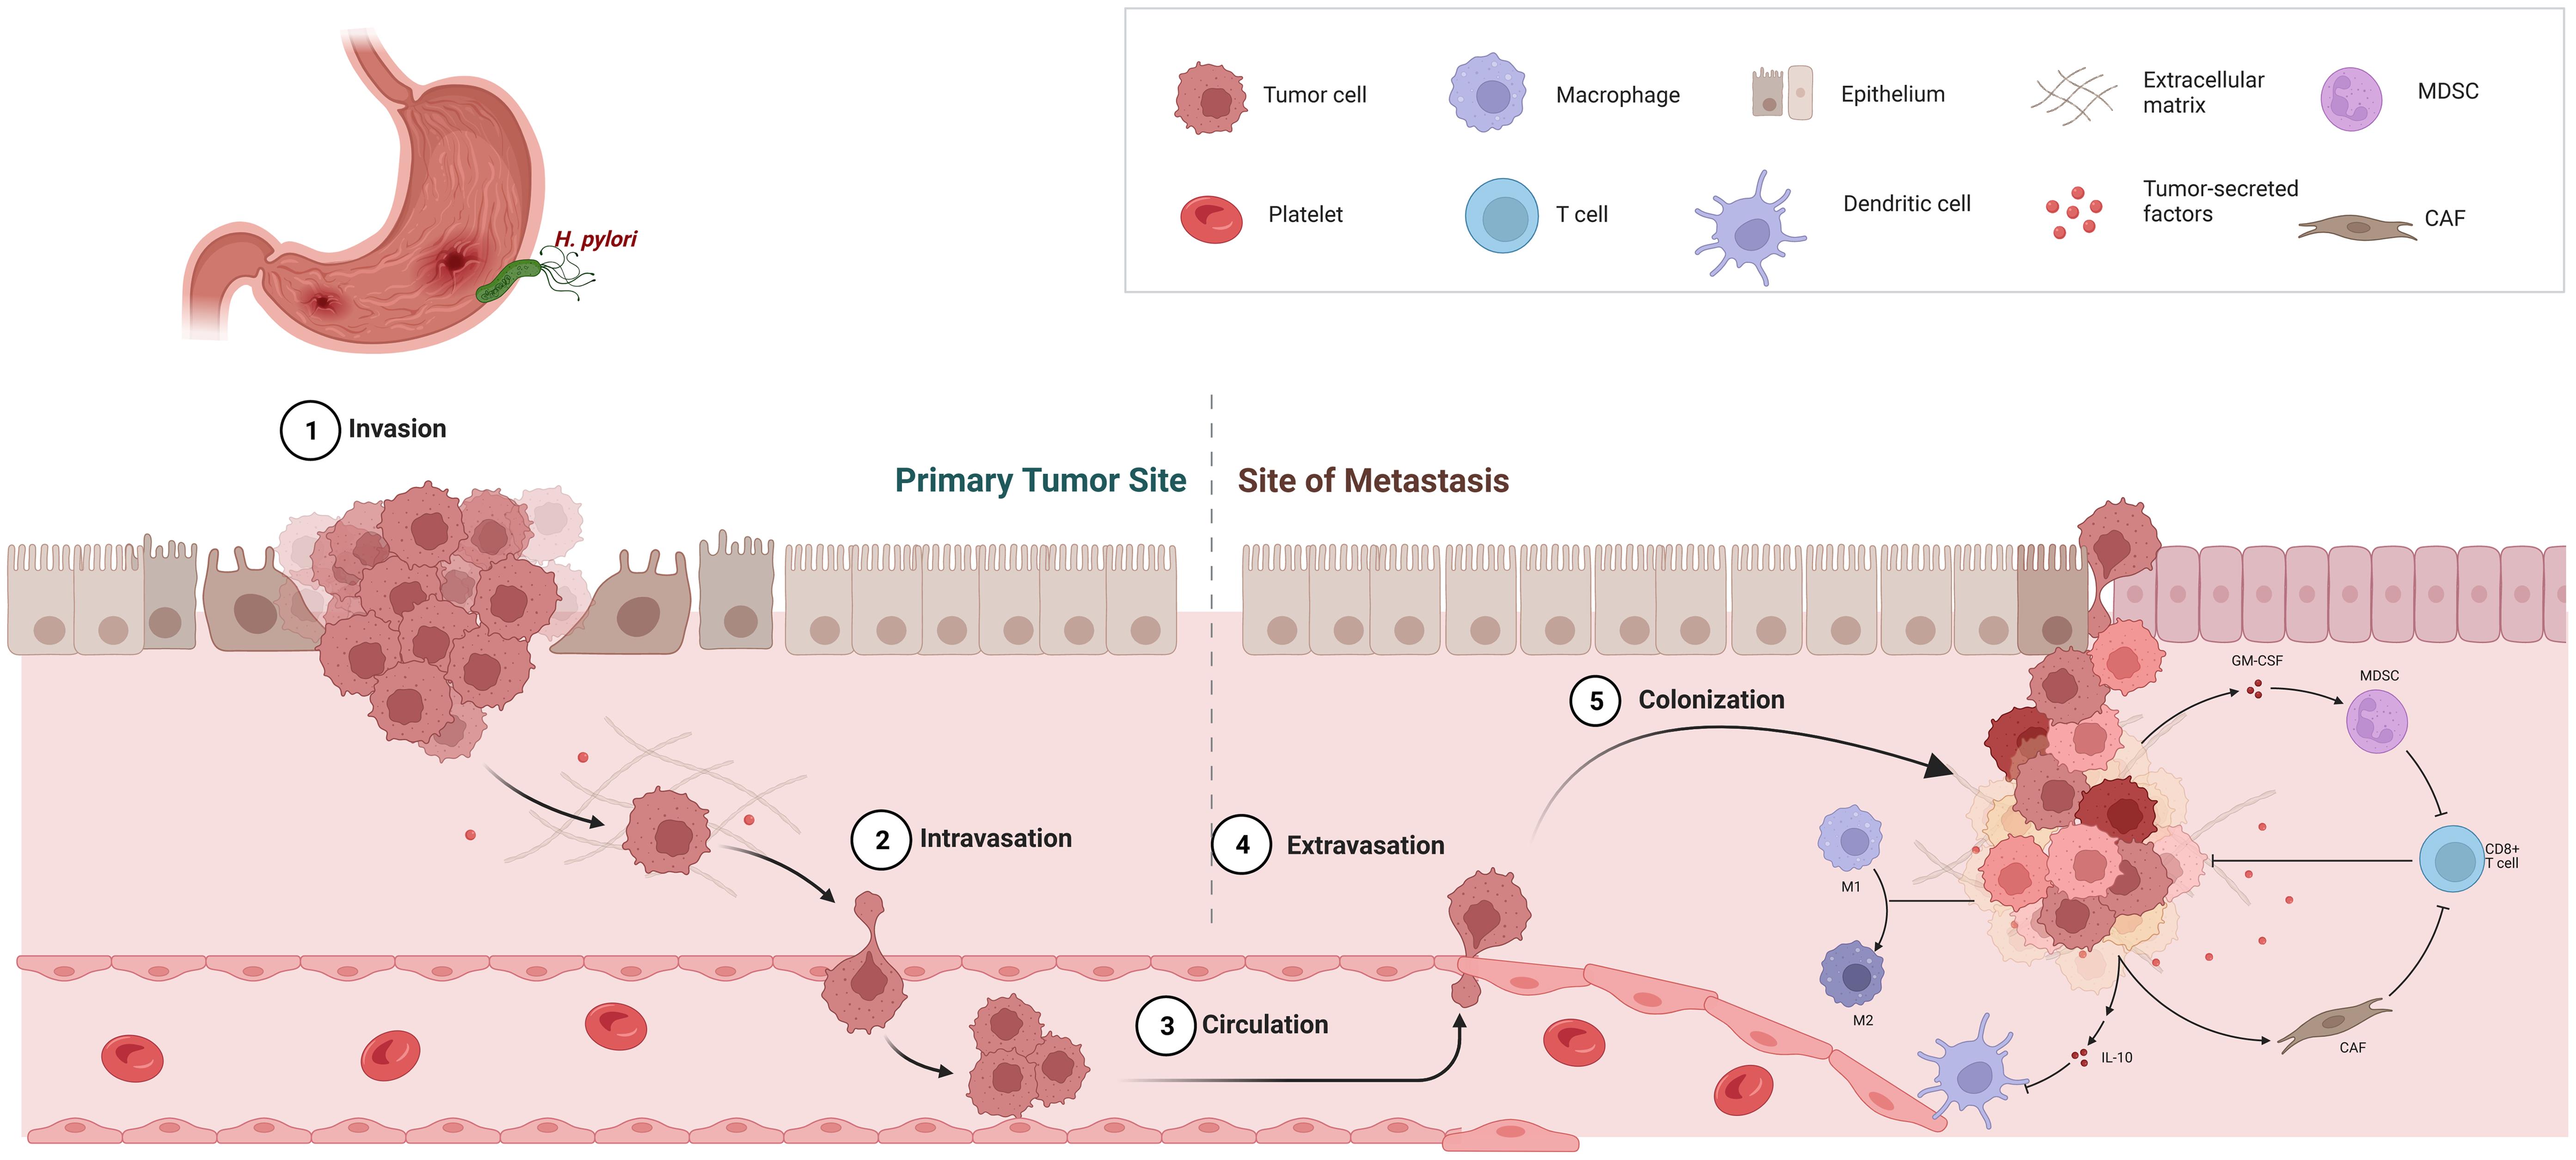 Overview of metastasis and TME.